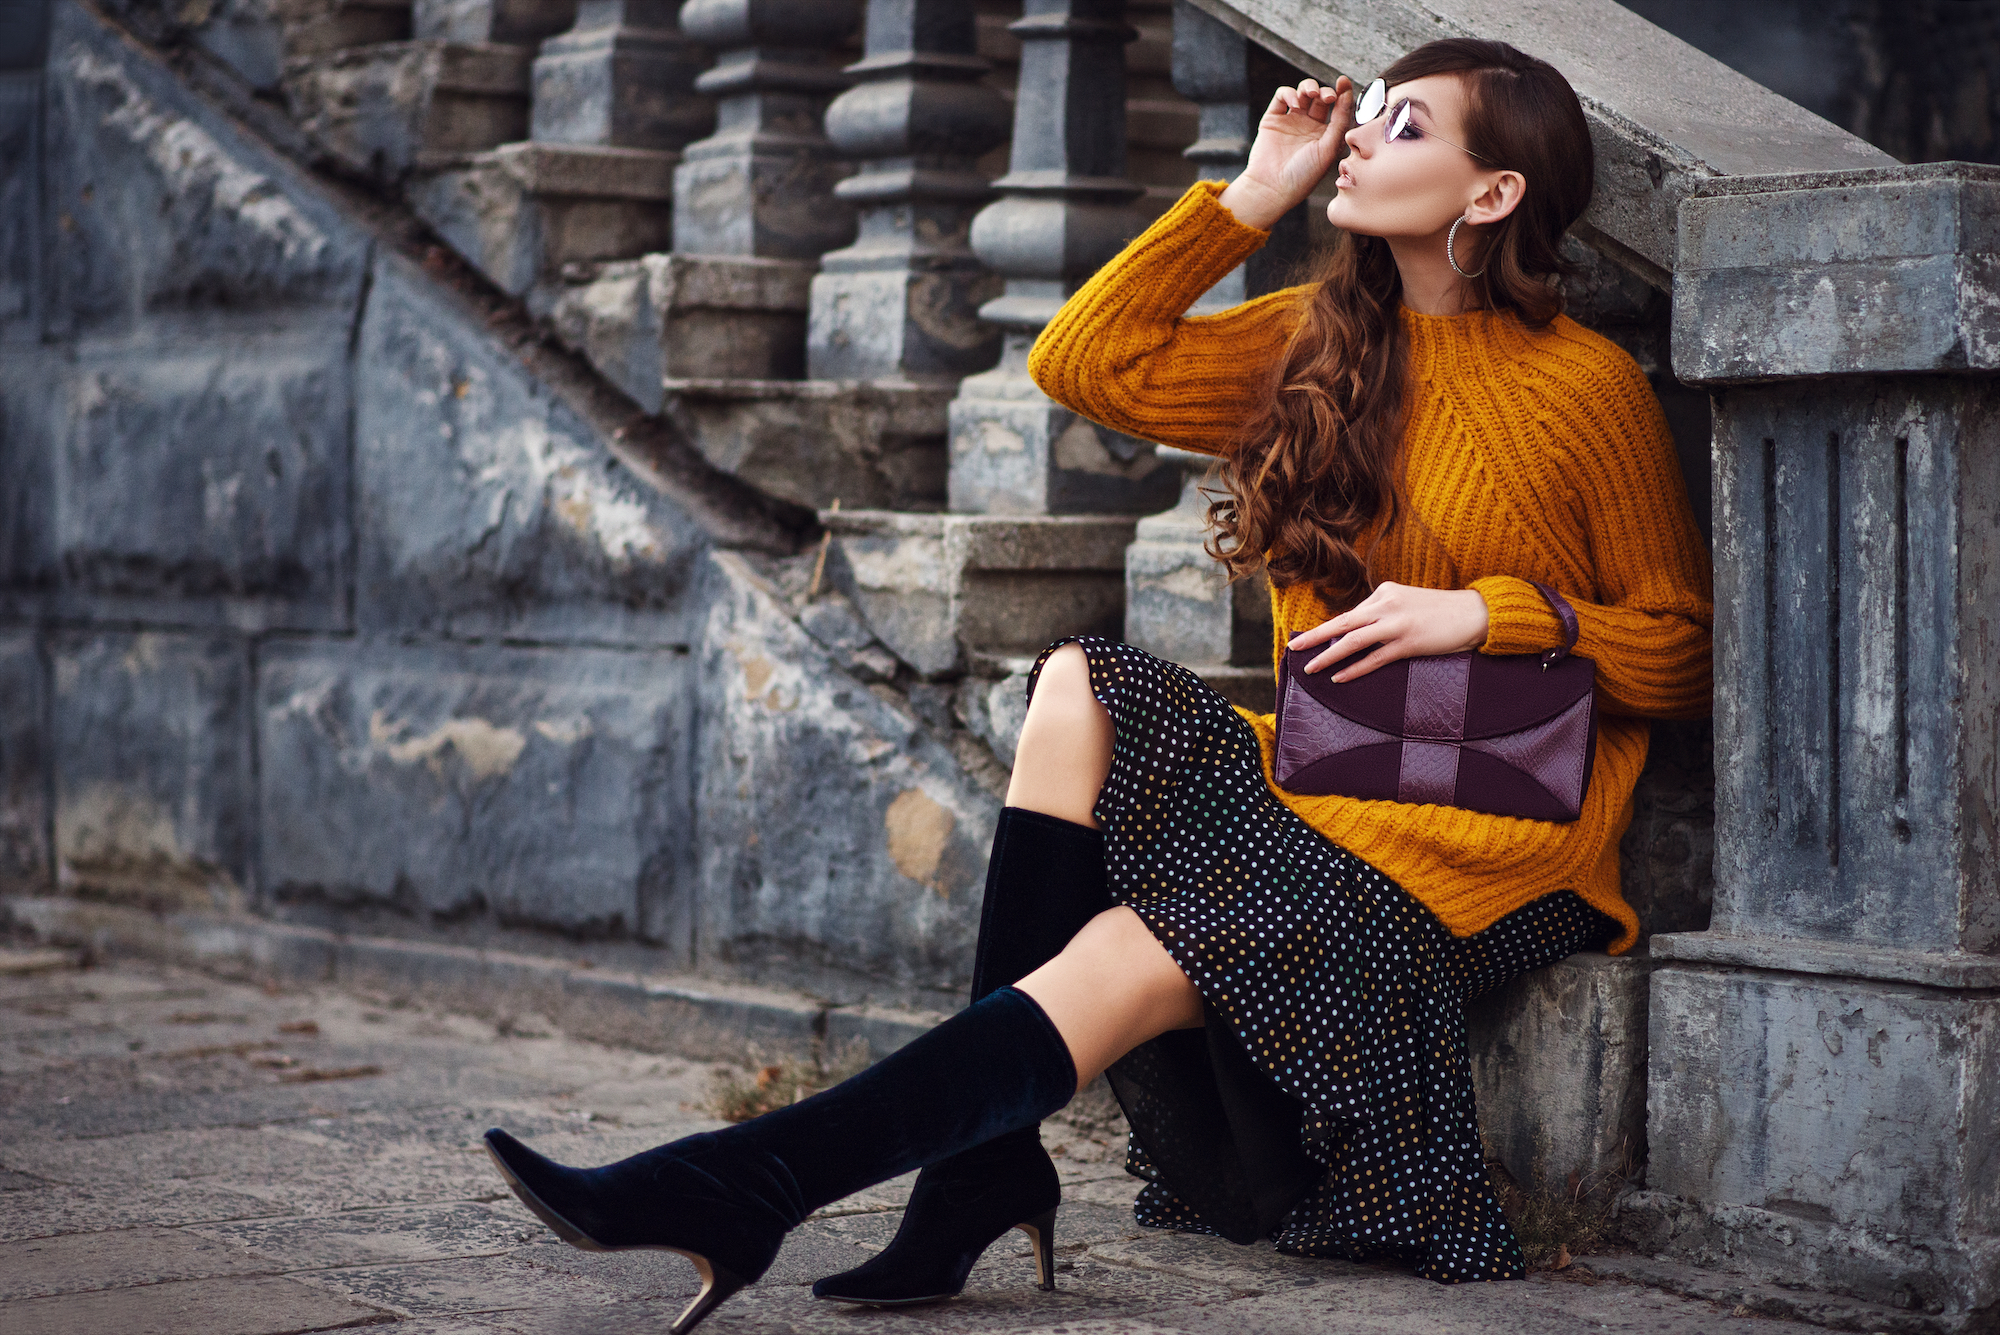 Midi Skirt With Boots: 6 Ways to Pair Them All Season